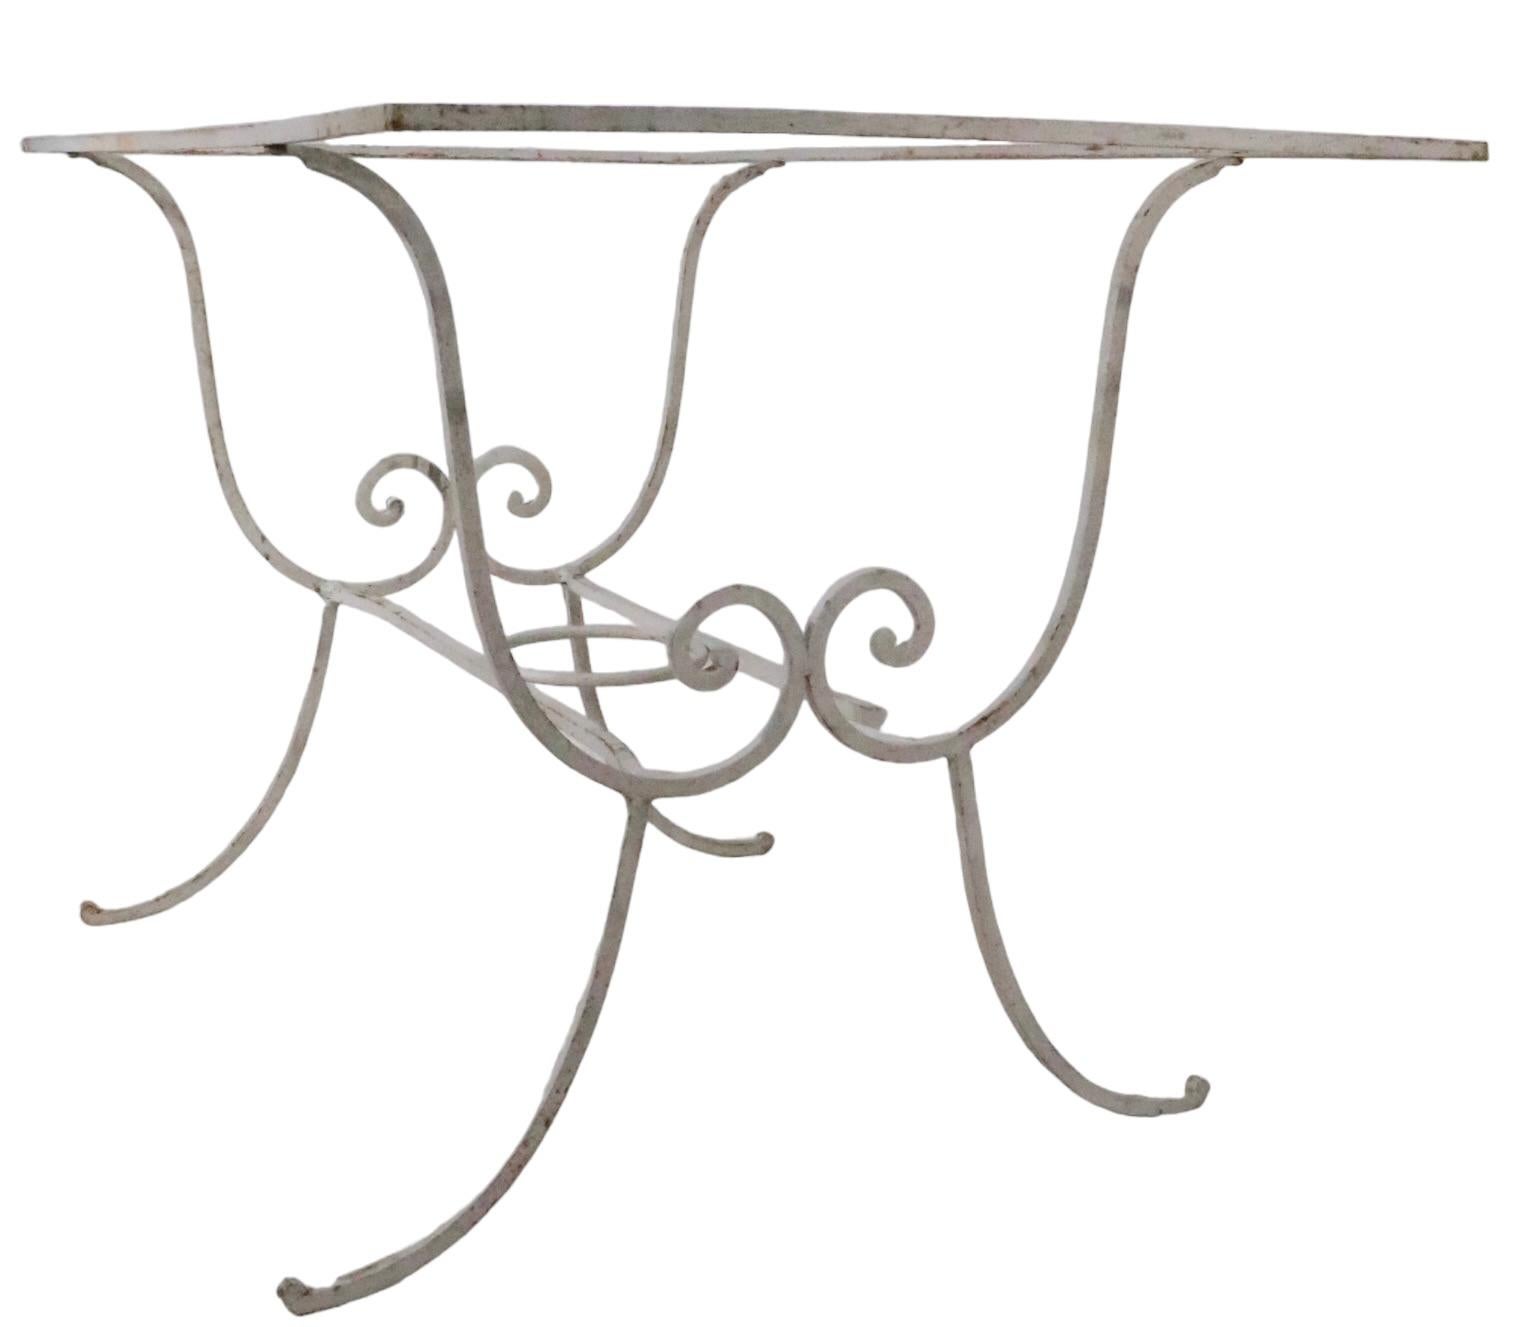 5pc. Art Deco Wrought Iron Patio Garden Poolside Dining Set c 1930's For Sale 5